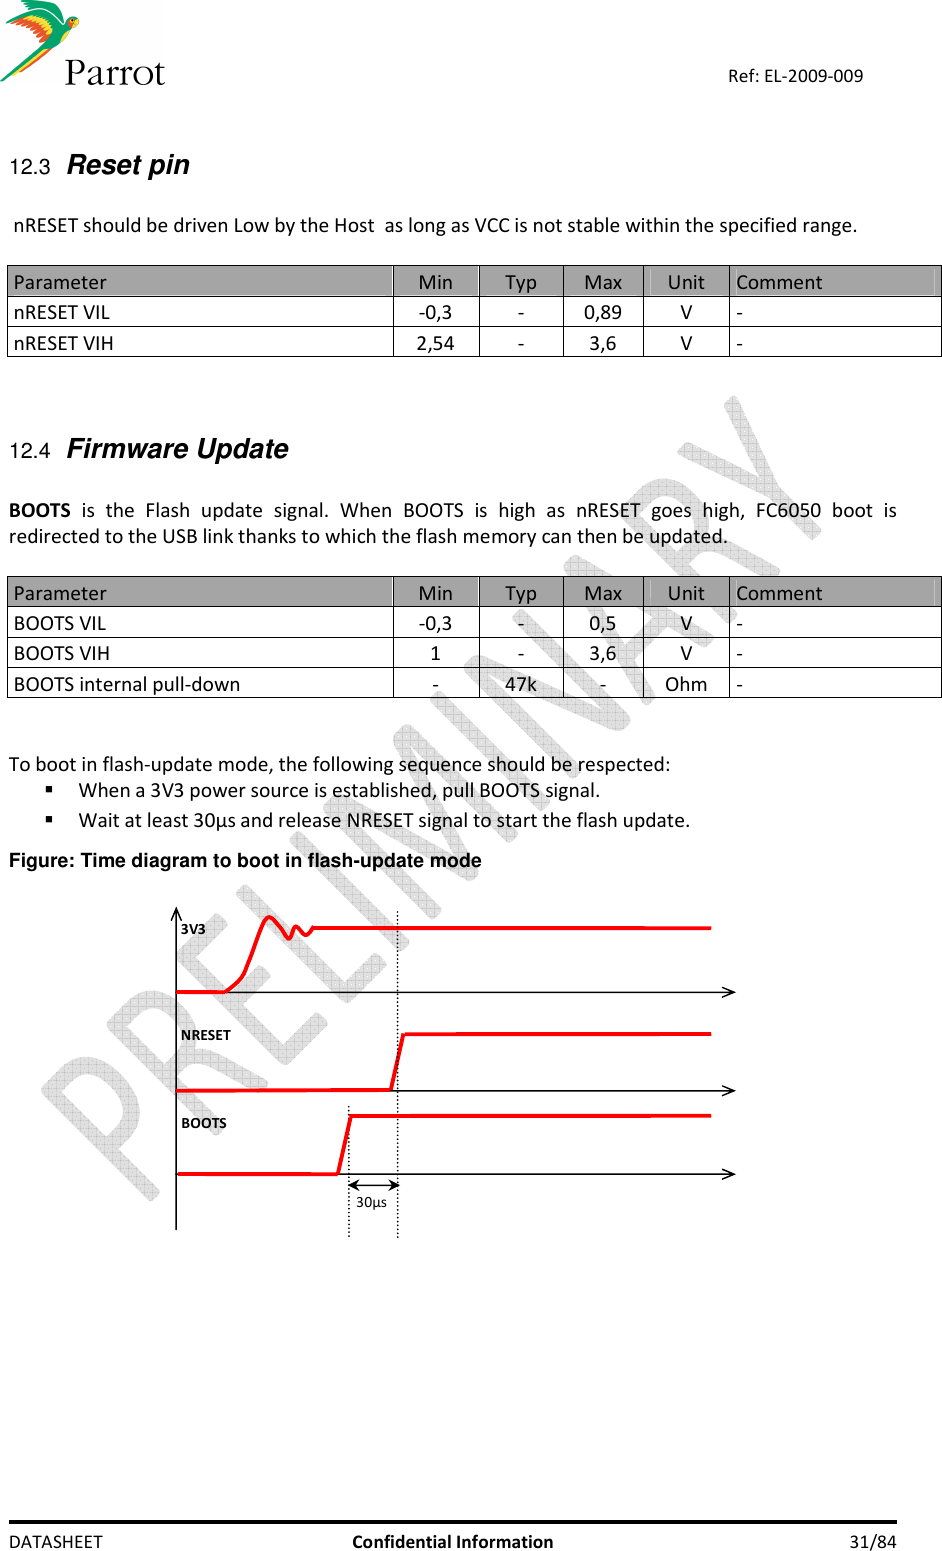    DATASHEET  Confidential Information  31/84 Ref: EL-2009-009  12.3 Reset pin   nRESET should be driven Low by the Host  as long as VCC is not stable within the specified range.  Parameter  Min  Typ  Max  Unit  Comment nRESET VIL  -0,3  -  0,89  V  - nRESET VIH  2,54  -  3,6  V  -    12.4 Firmware Update  BOOTS  is  the  Flash  update  signal.  When  BOOTS  is  high  as  nRESET  goes  high,  FC6050  boot  is redirected to the USB link thanks to which the flash memory can then be updated.  Parameter  Min  Typ  Max  Unit  Comment BOOTS VIL  -0,3  -  0,5  V  - BOOTS VIH  1  -  3,6  V  - BOOTS internal pull-down  -  47k  -  Ohm  -   To boot in flash-update mode, the following sequence should be respected:  When a 3V3 power source is established, pull BOOTS signal.  Wait at least 30µs and release NRESET signal to start the flash update. Figure: Time diagram to boot in flash-update mode      3V3 NRESET BOOTS 30µs 